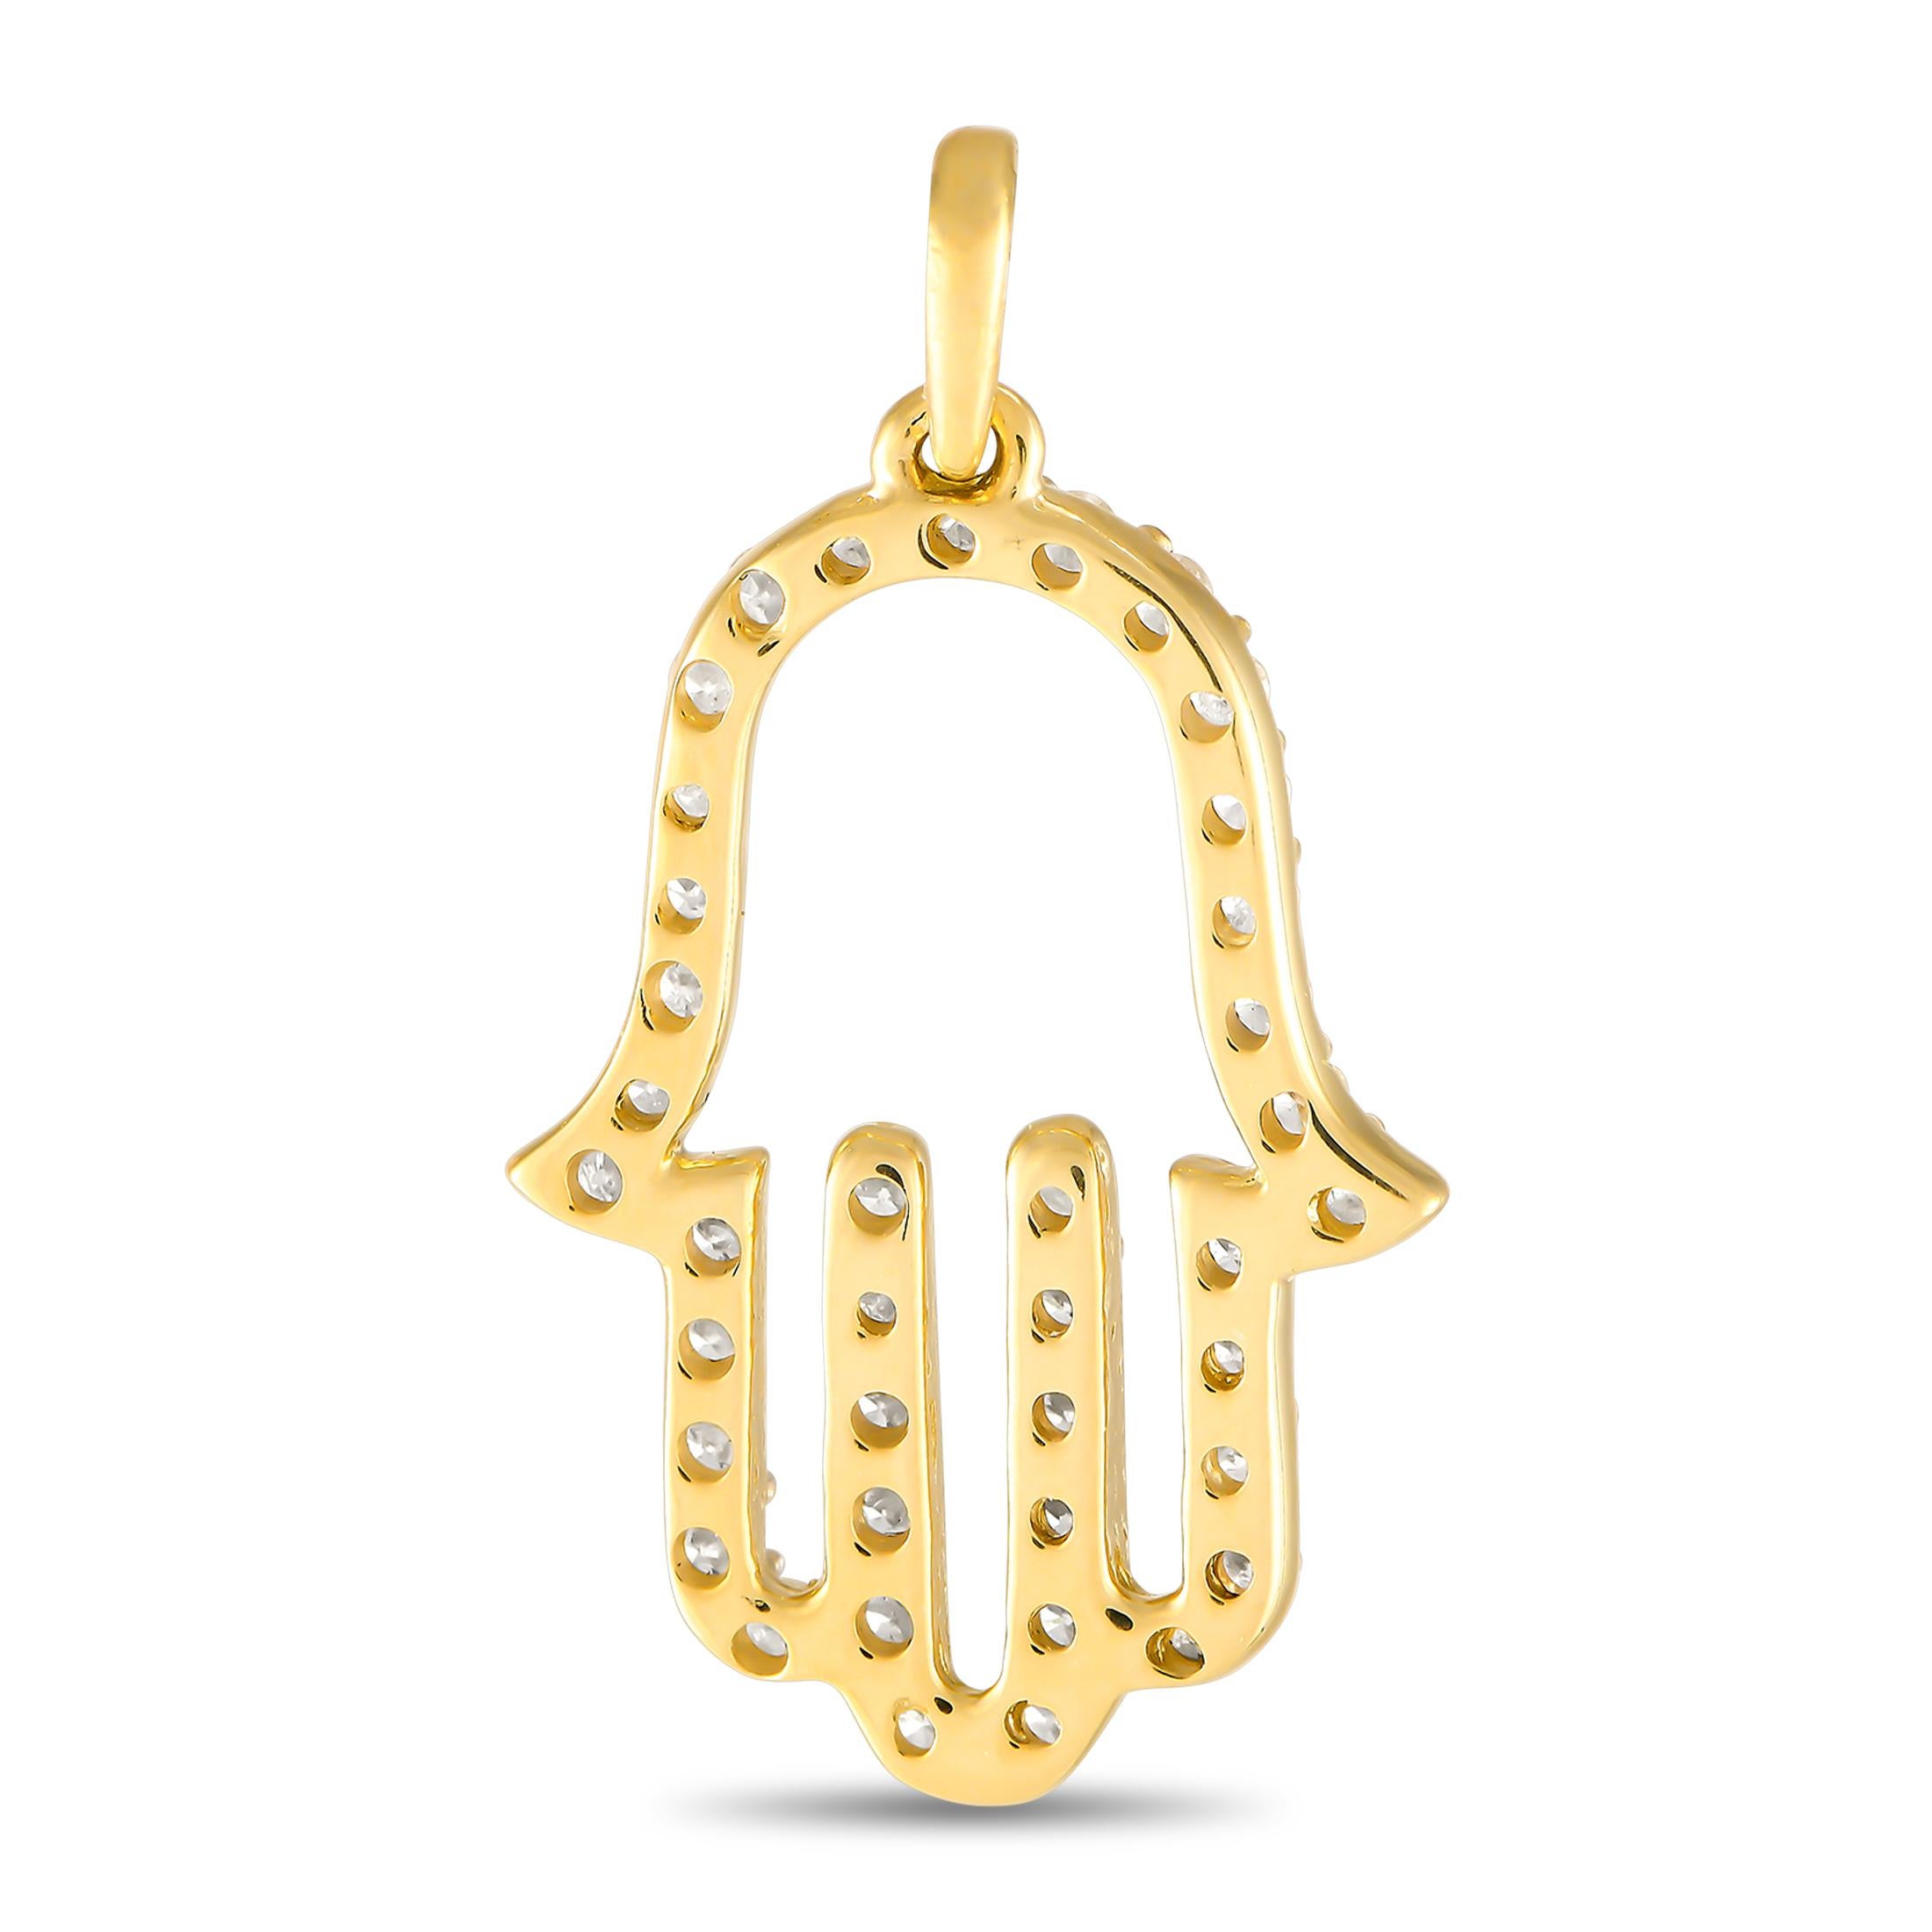 The Hamsa hand, regarded as a bringer of good luck and typically worn as a talisman, makes a meaningful addition to any ensemble. Wear this diamond-encrusted Hamsa hand pendant and be reminded of divine protection and your inner strength. The